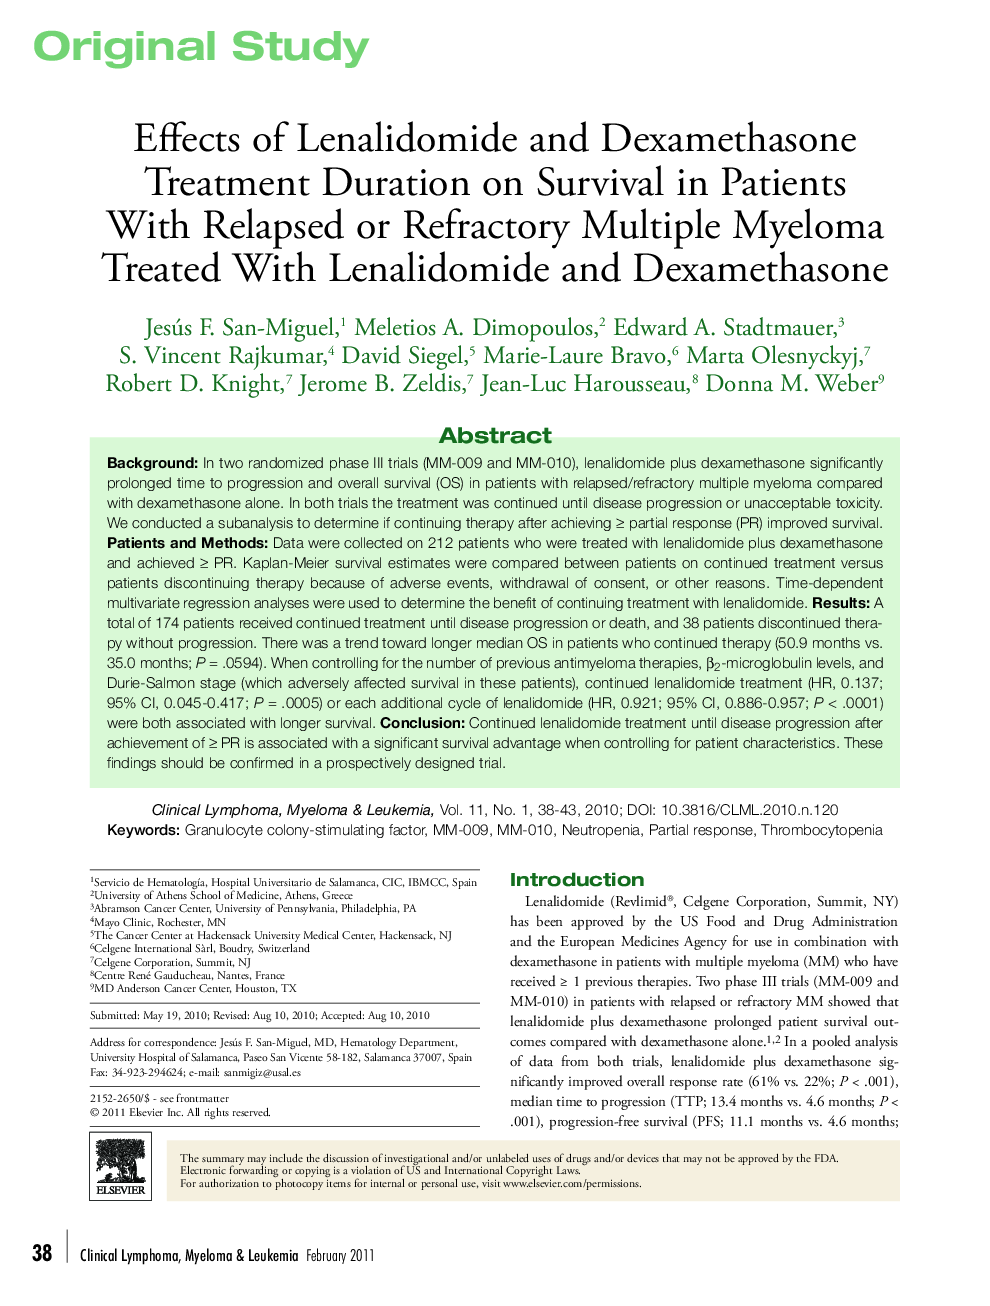 Effects of Lenalidomide and Dexamethasone Treatment Duration on Survival in Patients With Relapsed or Refractory Multiple Myeloma Treated With Lenalidomide and Dexamethasone 